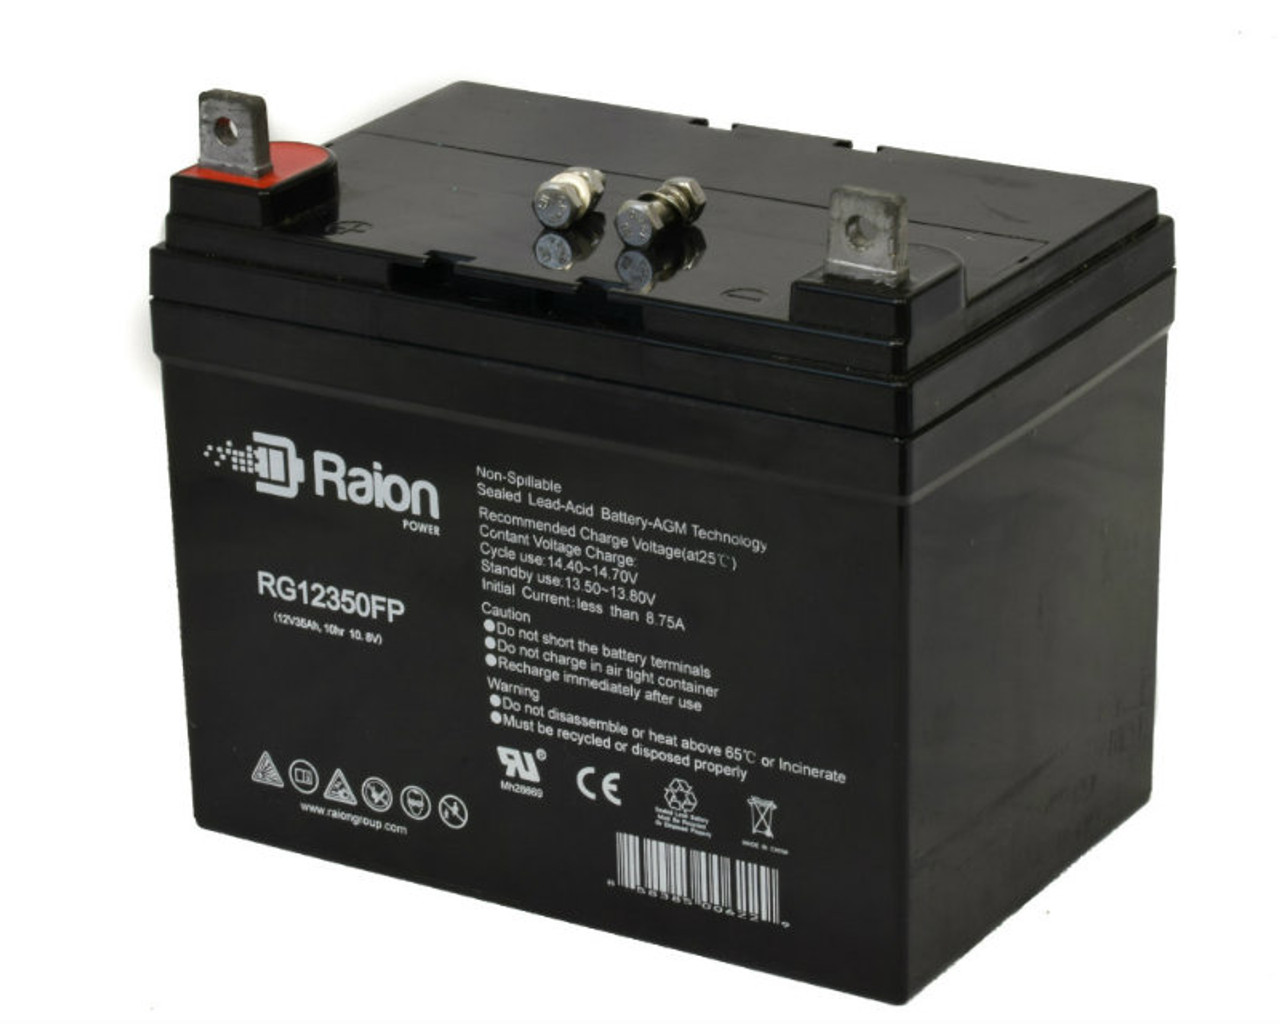 Raion Power Replacement 12V 35Ah RG12350FP Mobility Scooter Battery for Electric Mobility Rascal Turnabout Stowaway